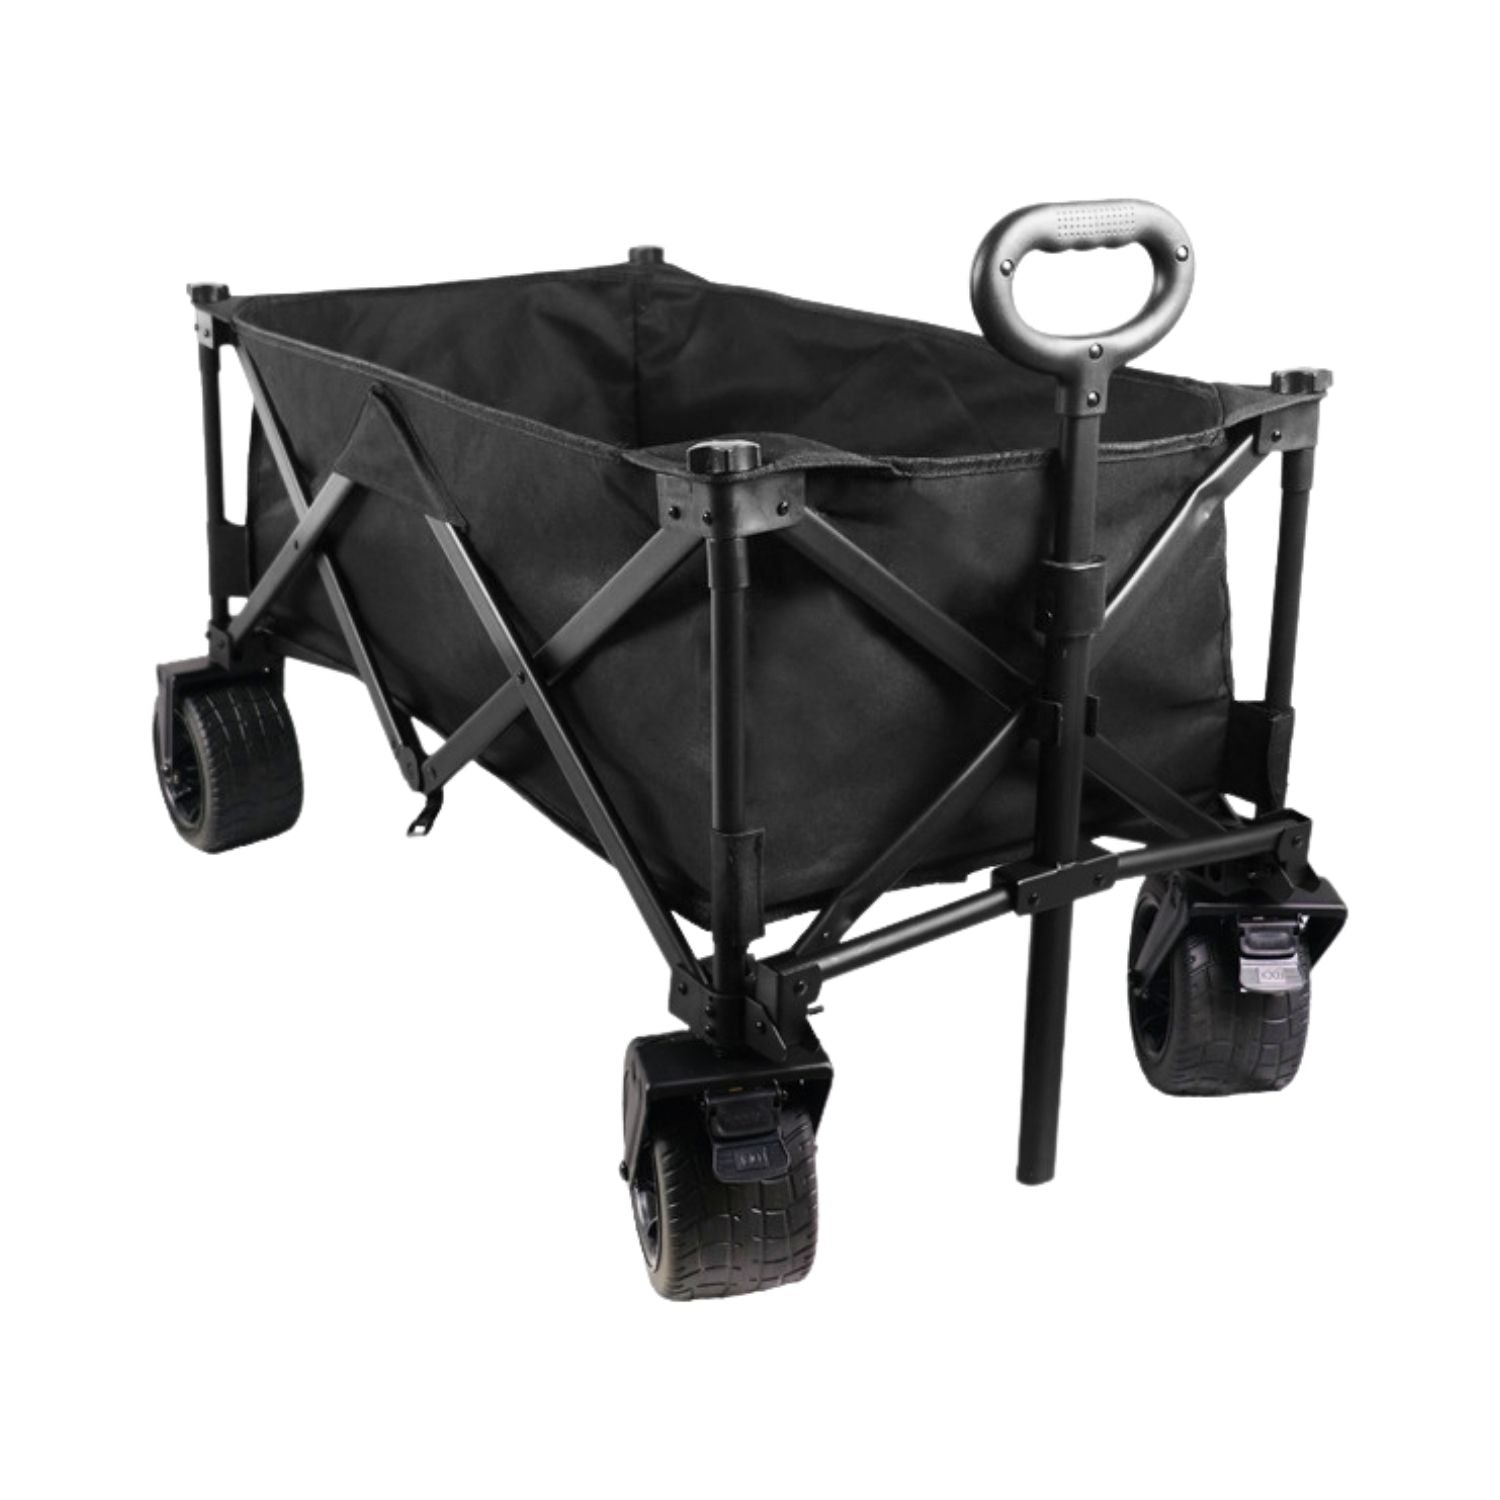 KILIROO Folding Wagon Trolley Cart with Wide Wheels and Rear Tail Gate (Black)